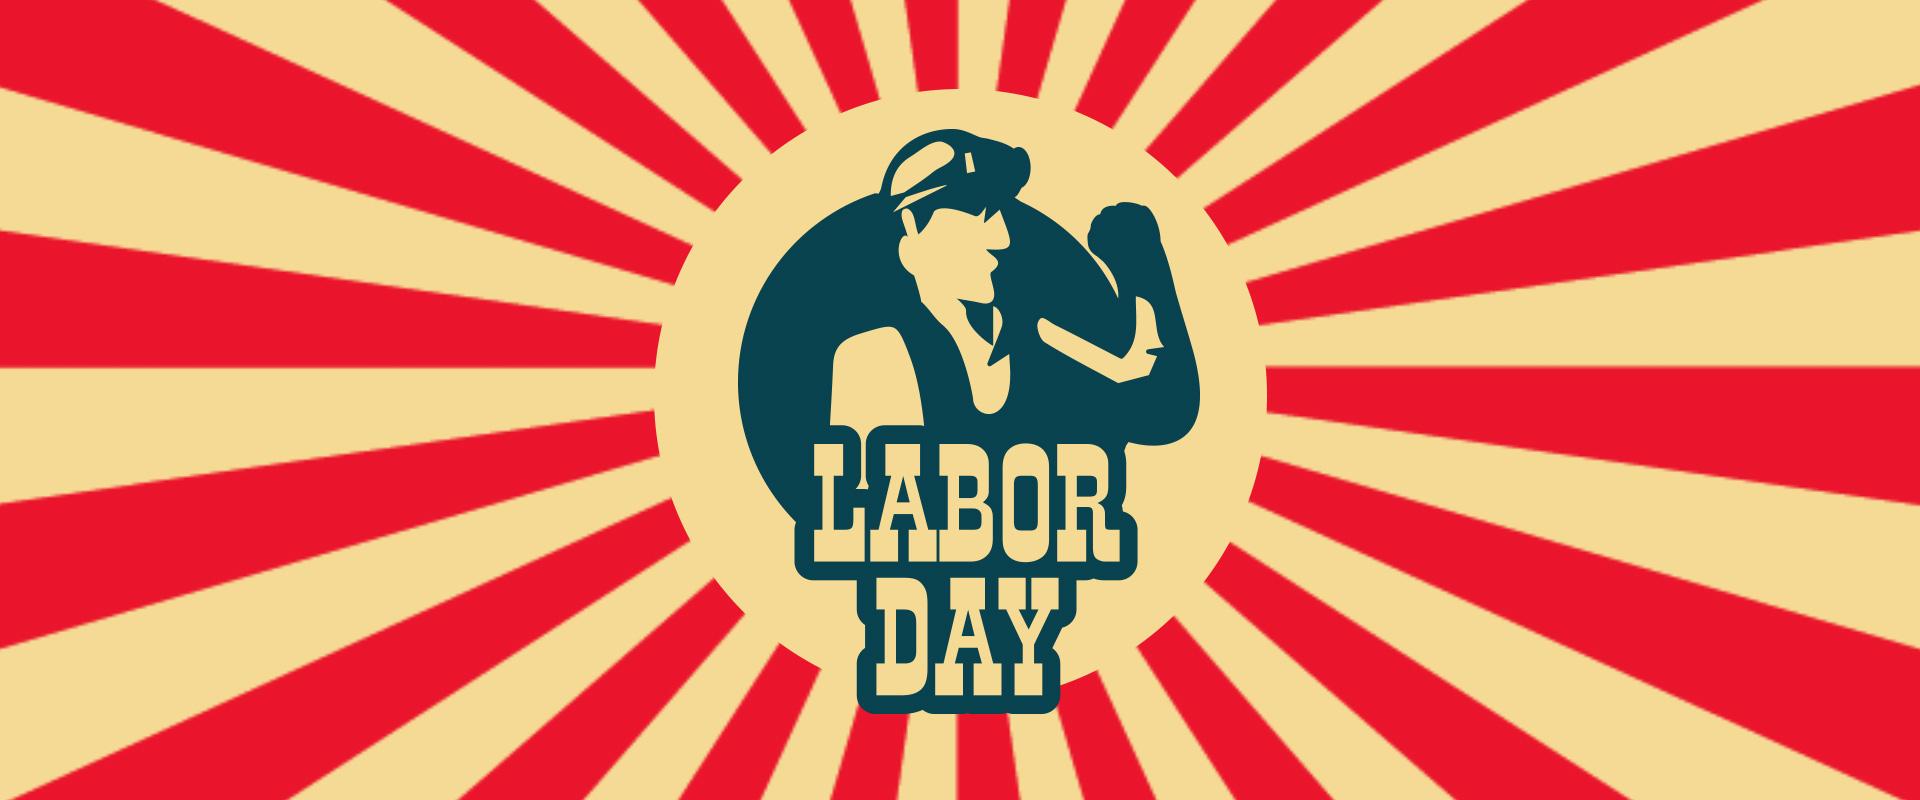 Labor Day Worker Card